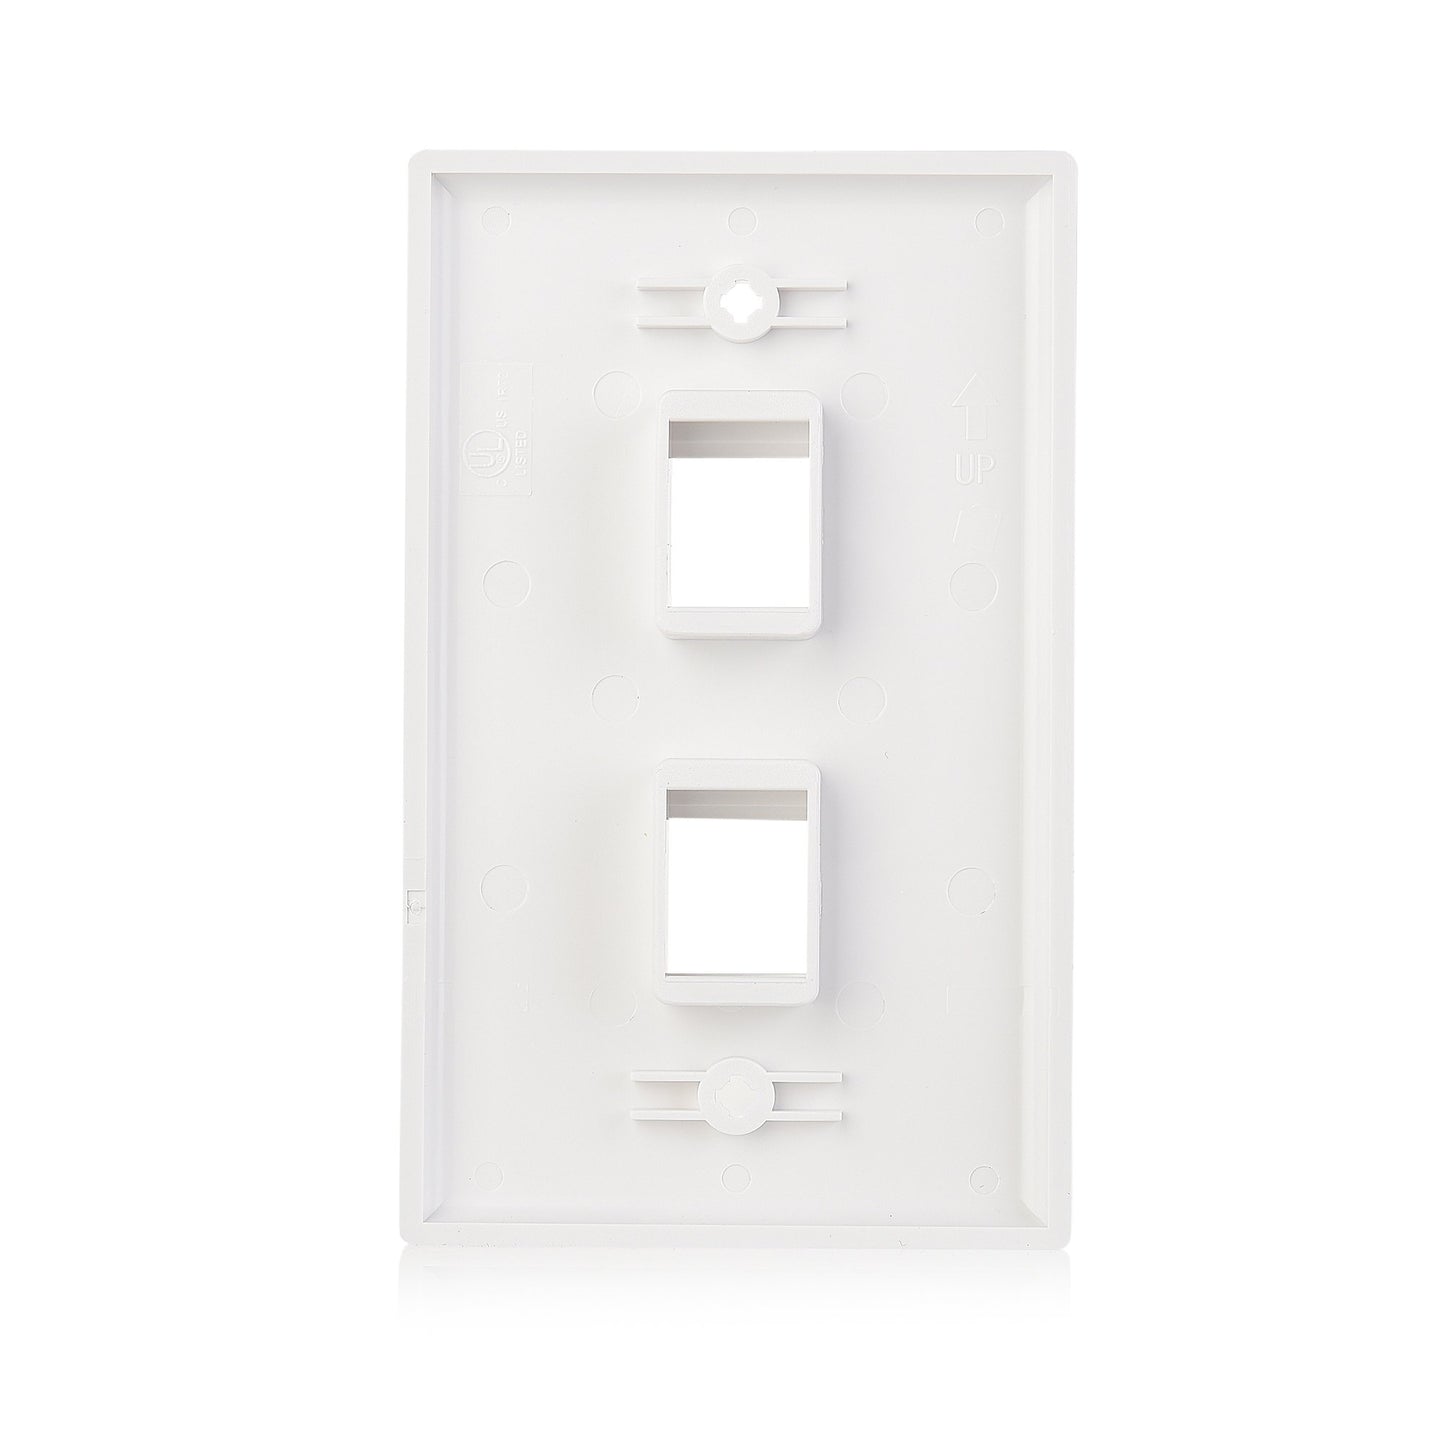 Cable Matters 10-Pack Low Profile 1 Port Keystone Jack Wall Plate in White